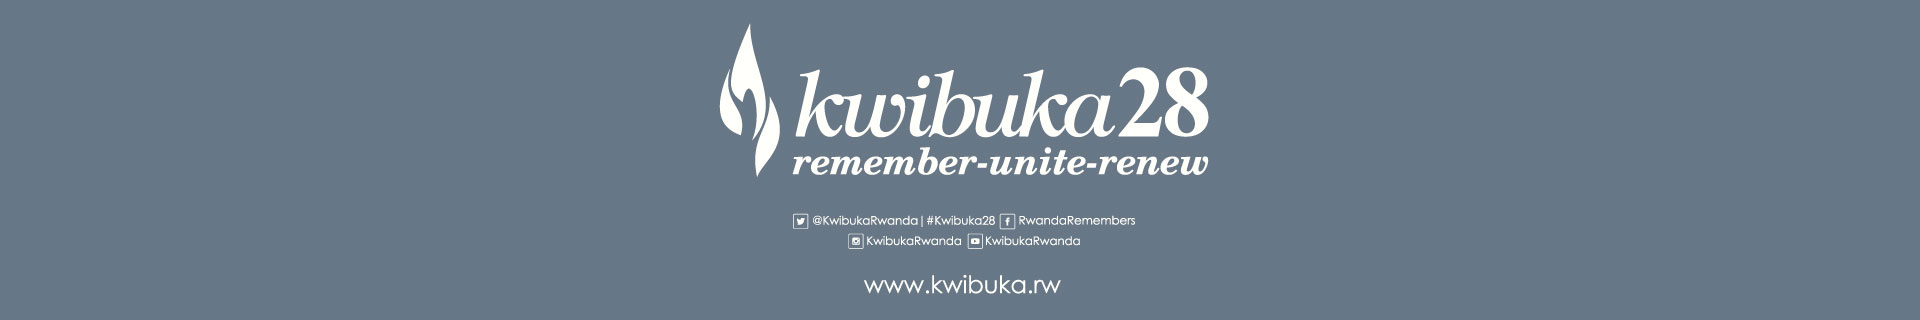 The 28th commemoration of the 1994 genocide against the Tutsi